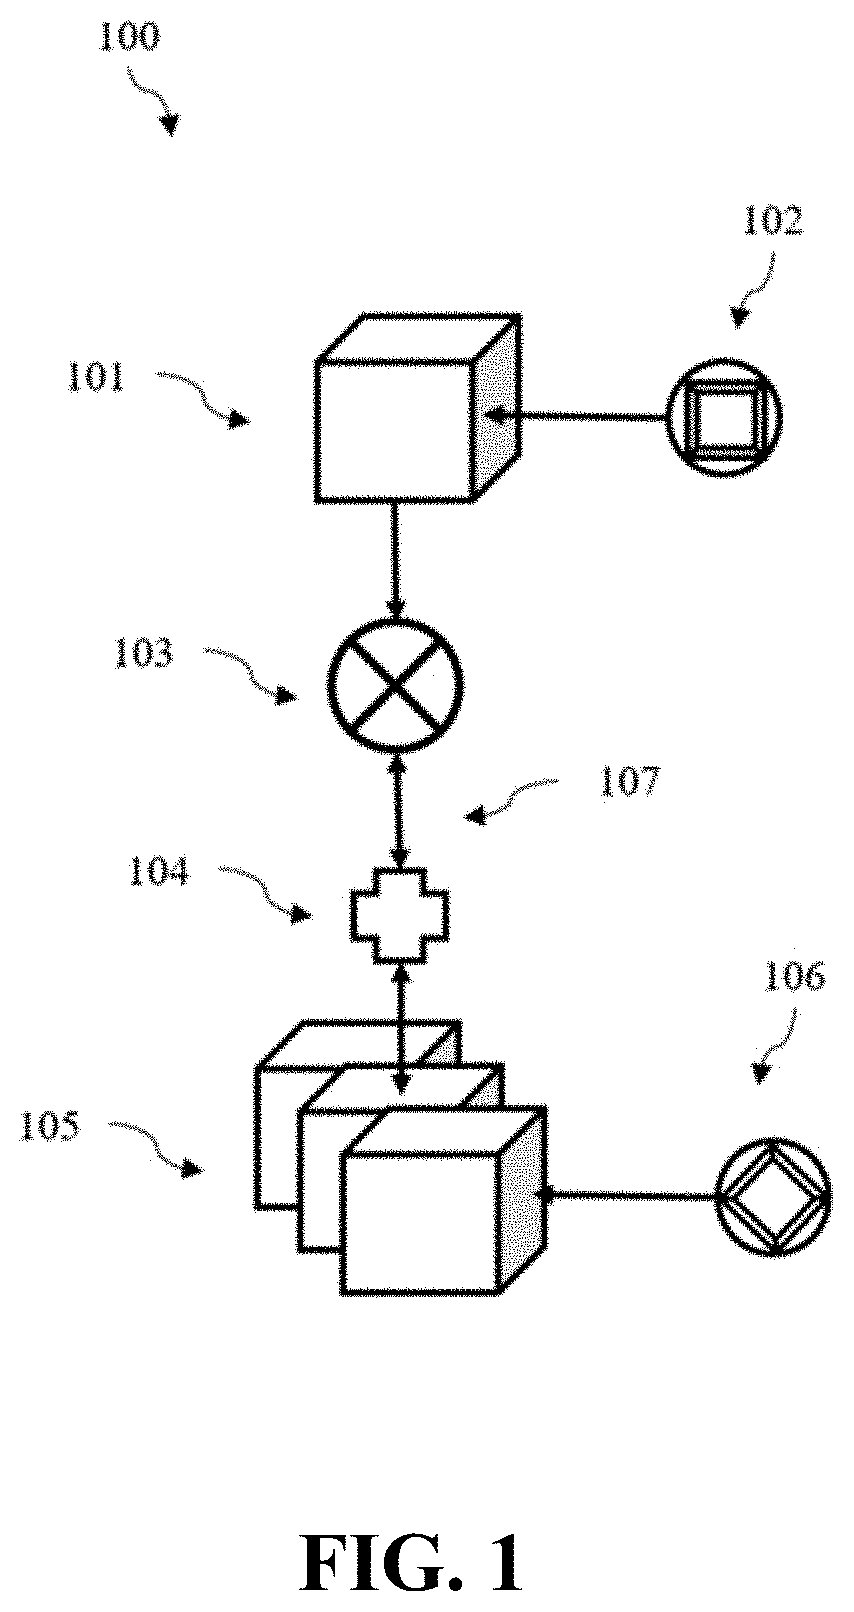 Integration of 3rd party geometry for visualization of large data sets system and method